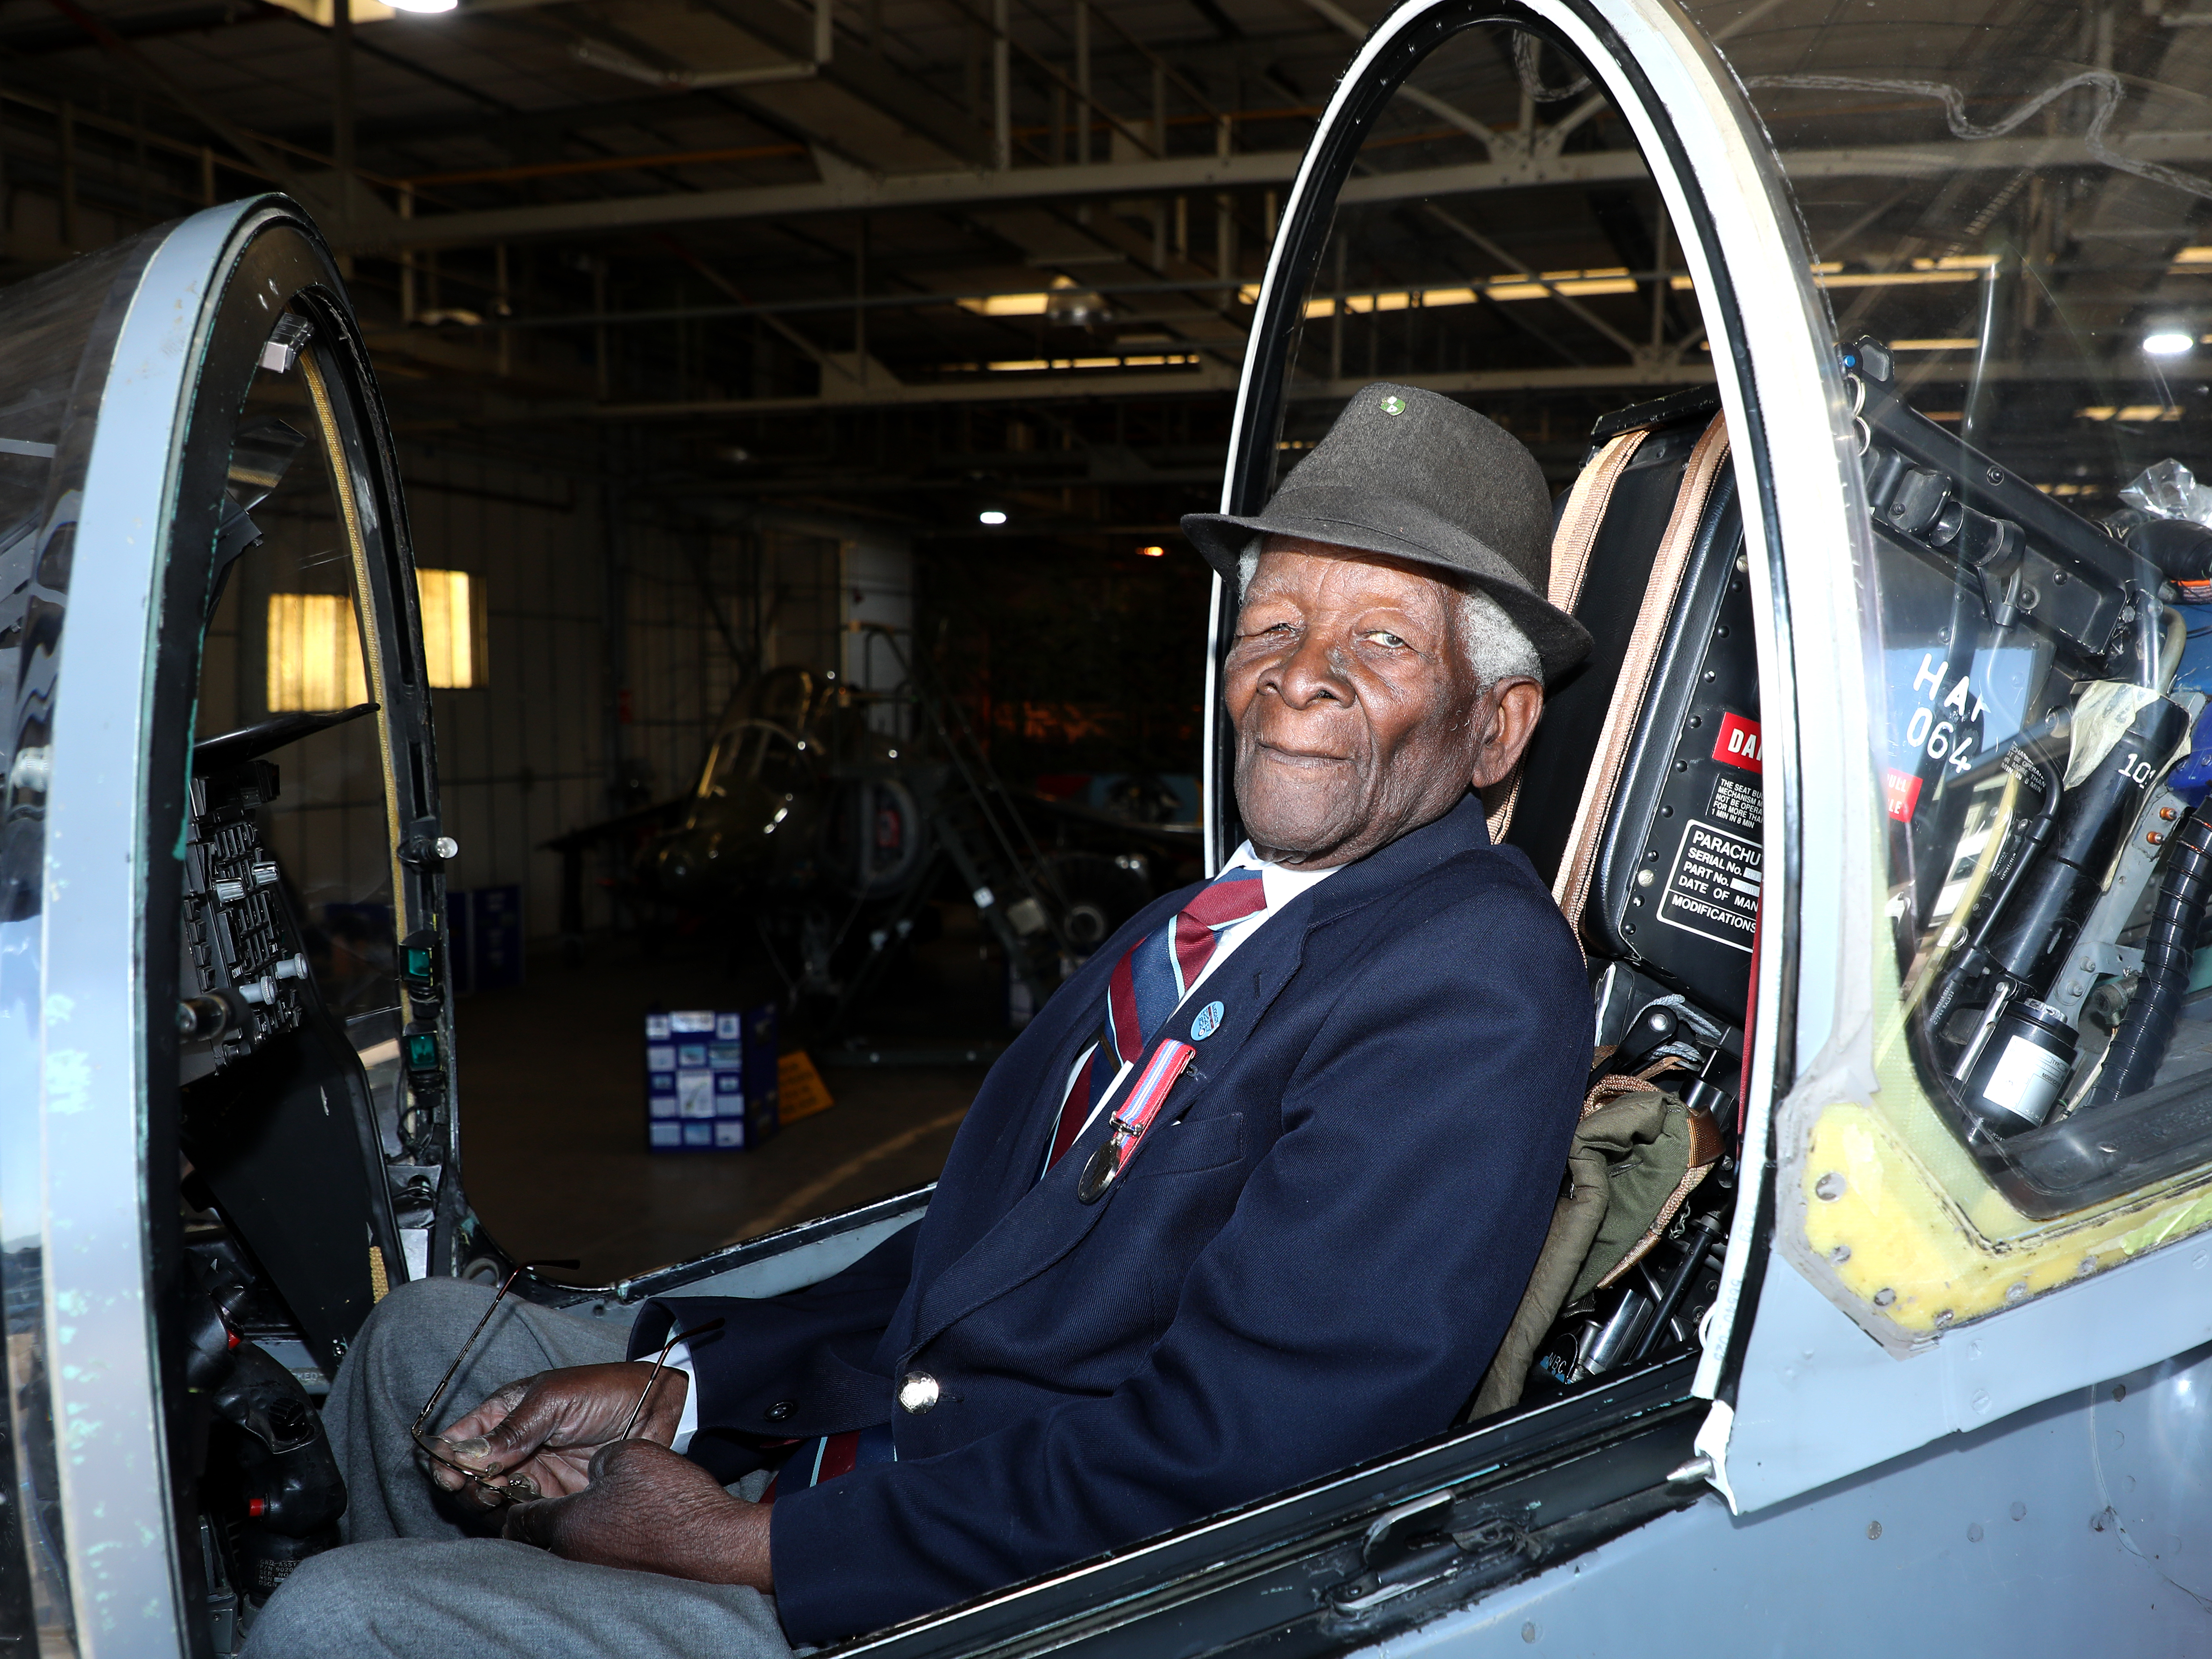 Image shows veteran in the cockpit of an aircraft inside a hangar.